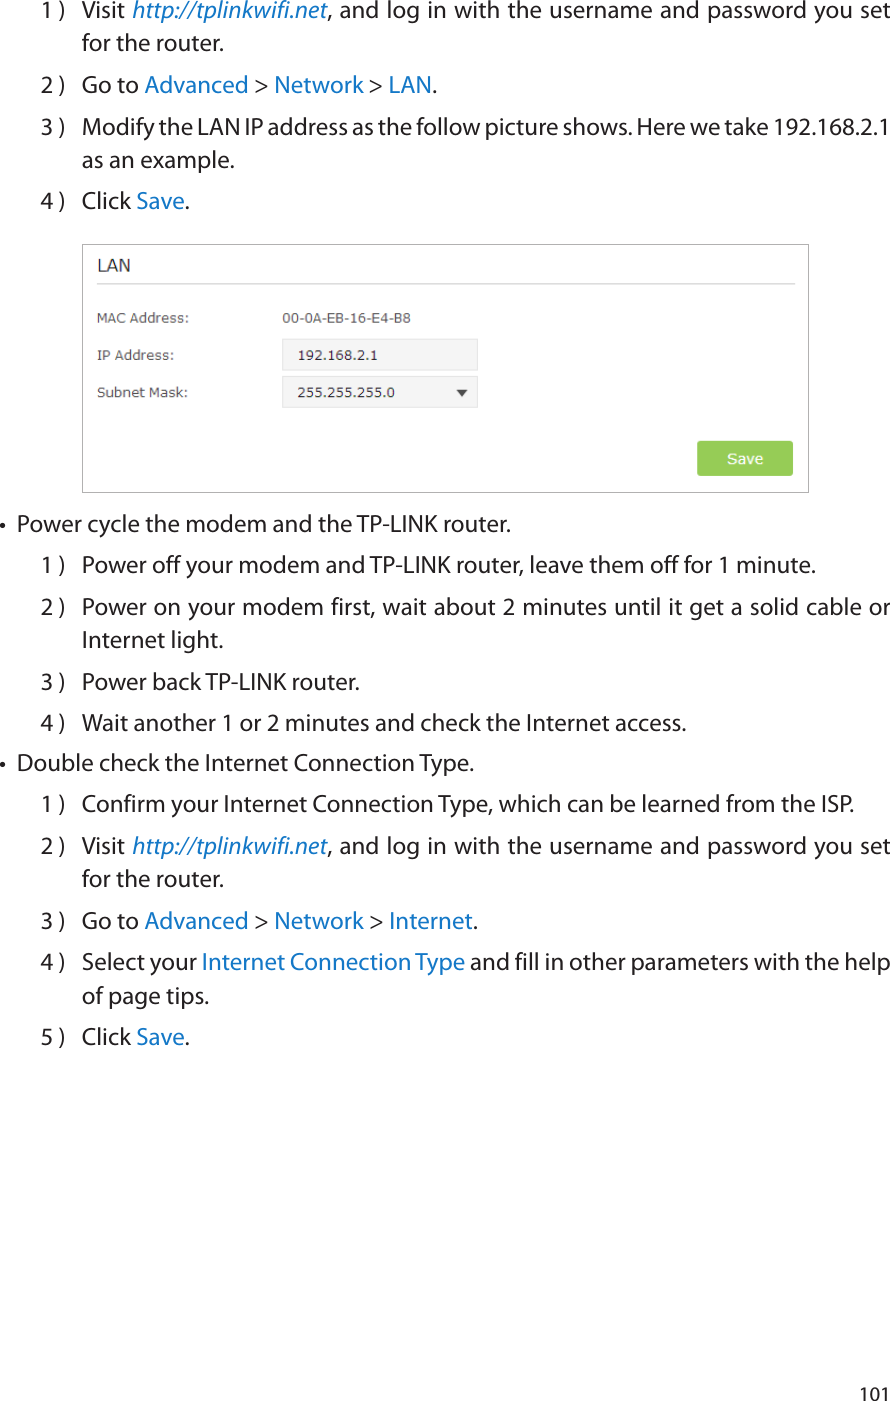 1011 )  Visit http://tplinkwifi.net, and log in with the username and password you set for the router.2 )  Go to Advanced &gt; Network &gt; LAN.3 )  Modify the LAN IP address as the follow picture shows. Here we take 192.168.2.1 as an example.4 )  Click Save.•  Power cycle the modem and the TP-LINK router.1 )  Power off your modem and TP-LINK router, leave them off for 1 minute.2 )  Power on your modem first, wait about 2 minutes until it get a solid cable or Internet light.3 )  Power back TP-LINK router.4 )  Wait another 1 or 2 minutes and check the Internet access.•  Double check the Internet Connection Type.1 )  Confirm your Internet Connection Type, which can be learned from the ISP.2 )  Visit http://tplinkwifi.net, and log in with the username and password you set for the router.3 )  Go to Advanced &gt; Network &gt; Internet.4 )  Select your Internet Connection Type and fill in other parameters with the help of page tips.5 )  Click Save.